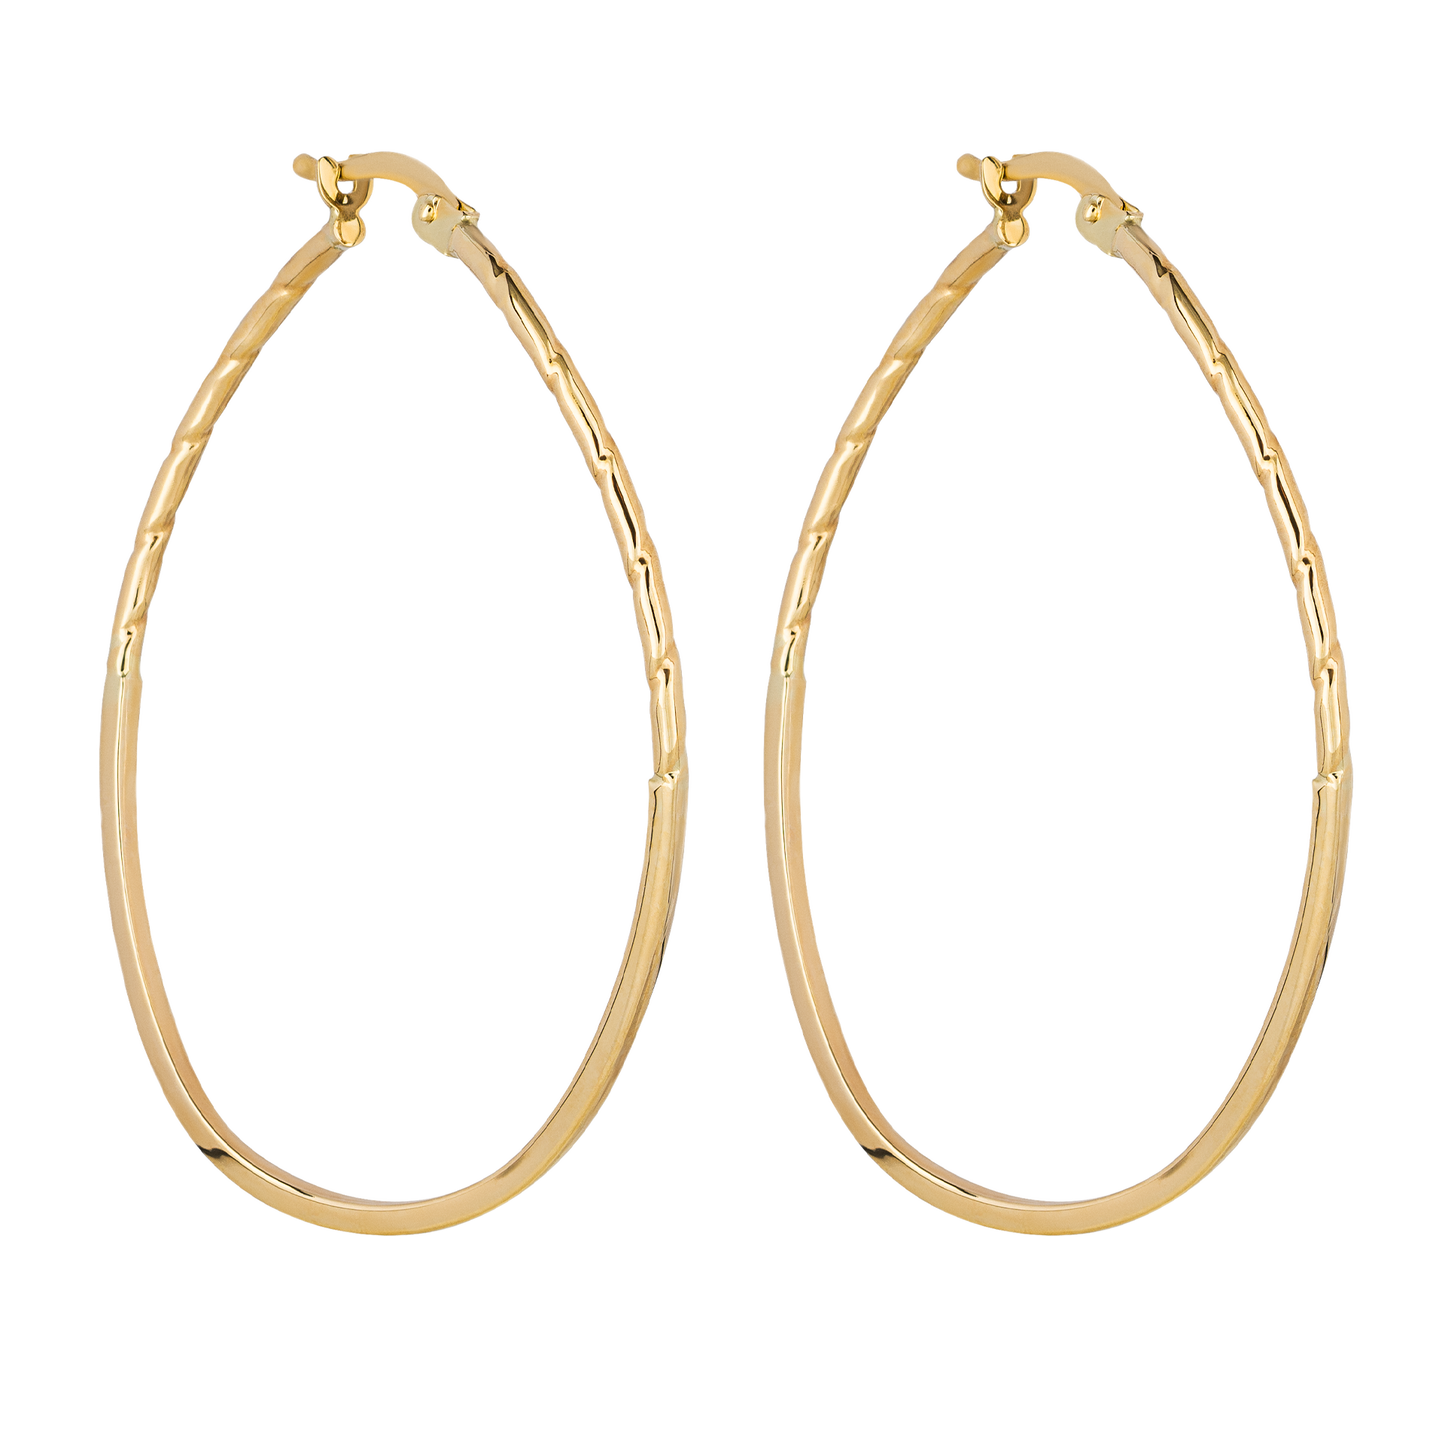 Double Row Hoop Earrings in Yellow and White Gold (GE2410)